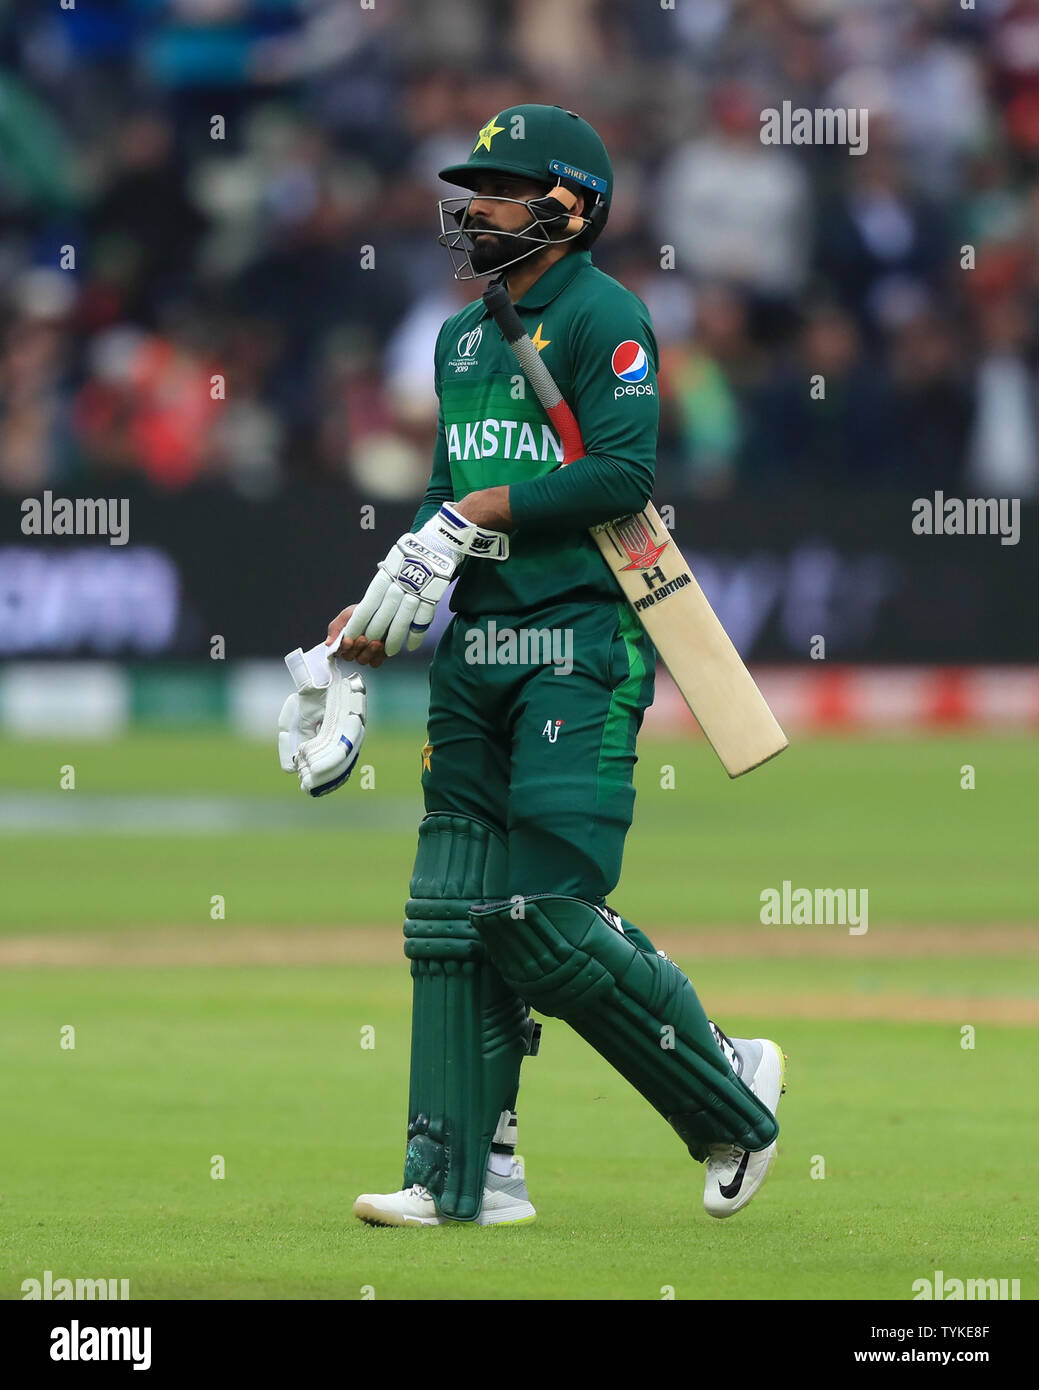 Pakistan's Mohammad Hafeez walks off after being dismissed during the ICC Cricket World Cup group stage match at Edgbaston, Birmingham. Stock Photo